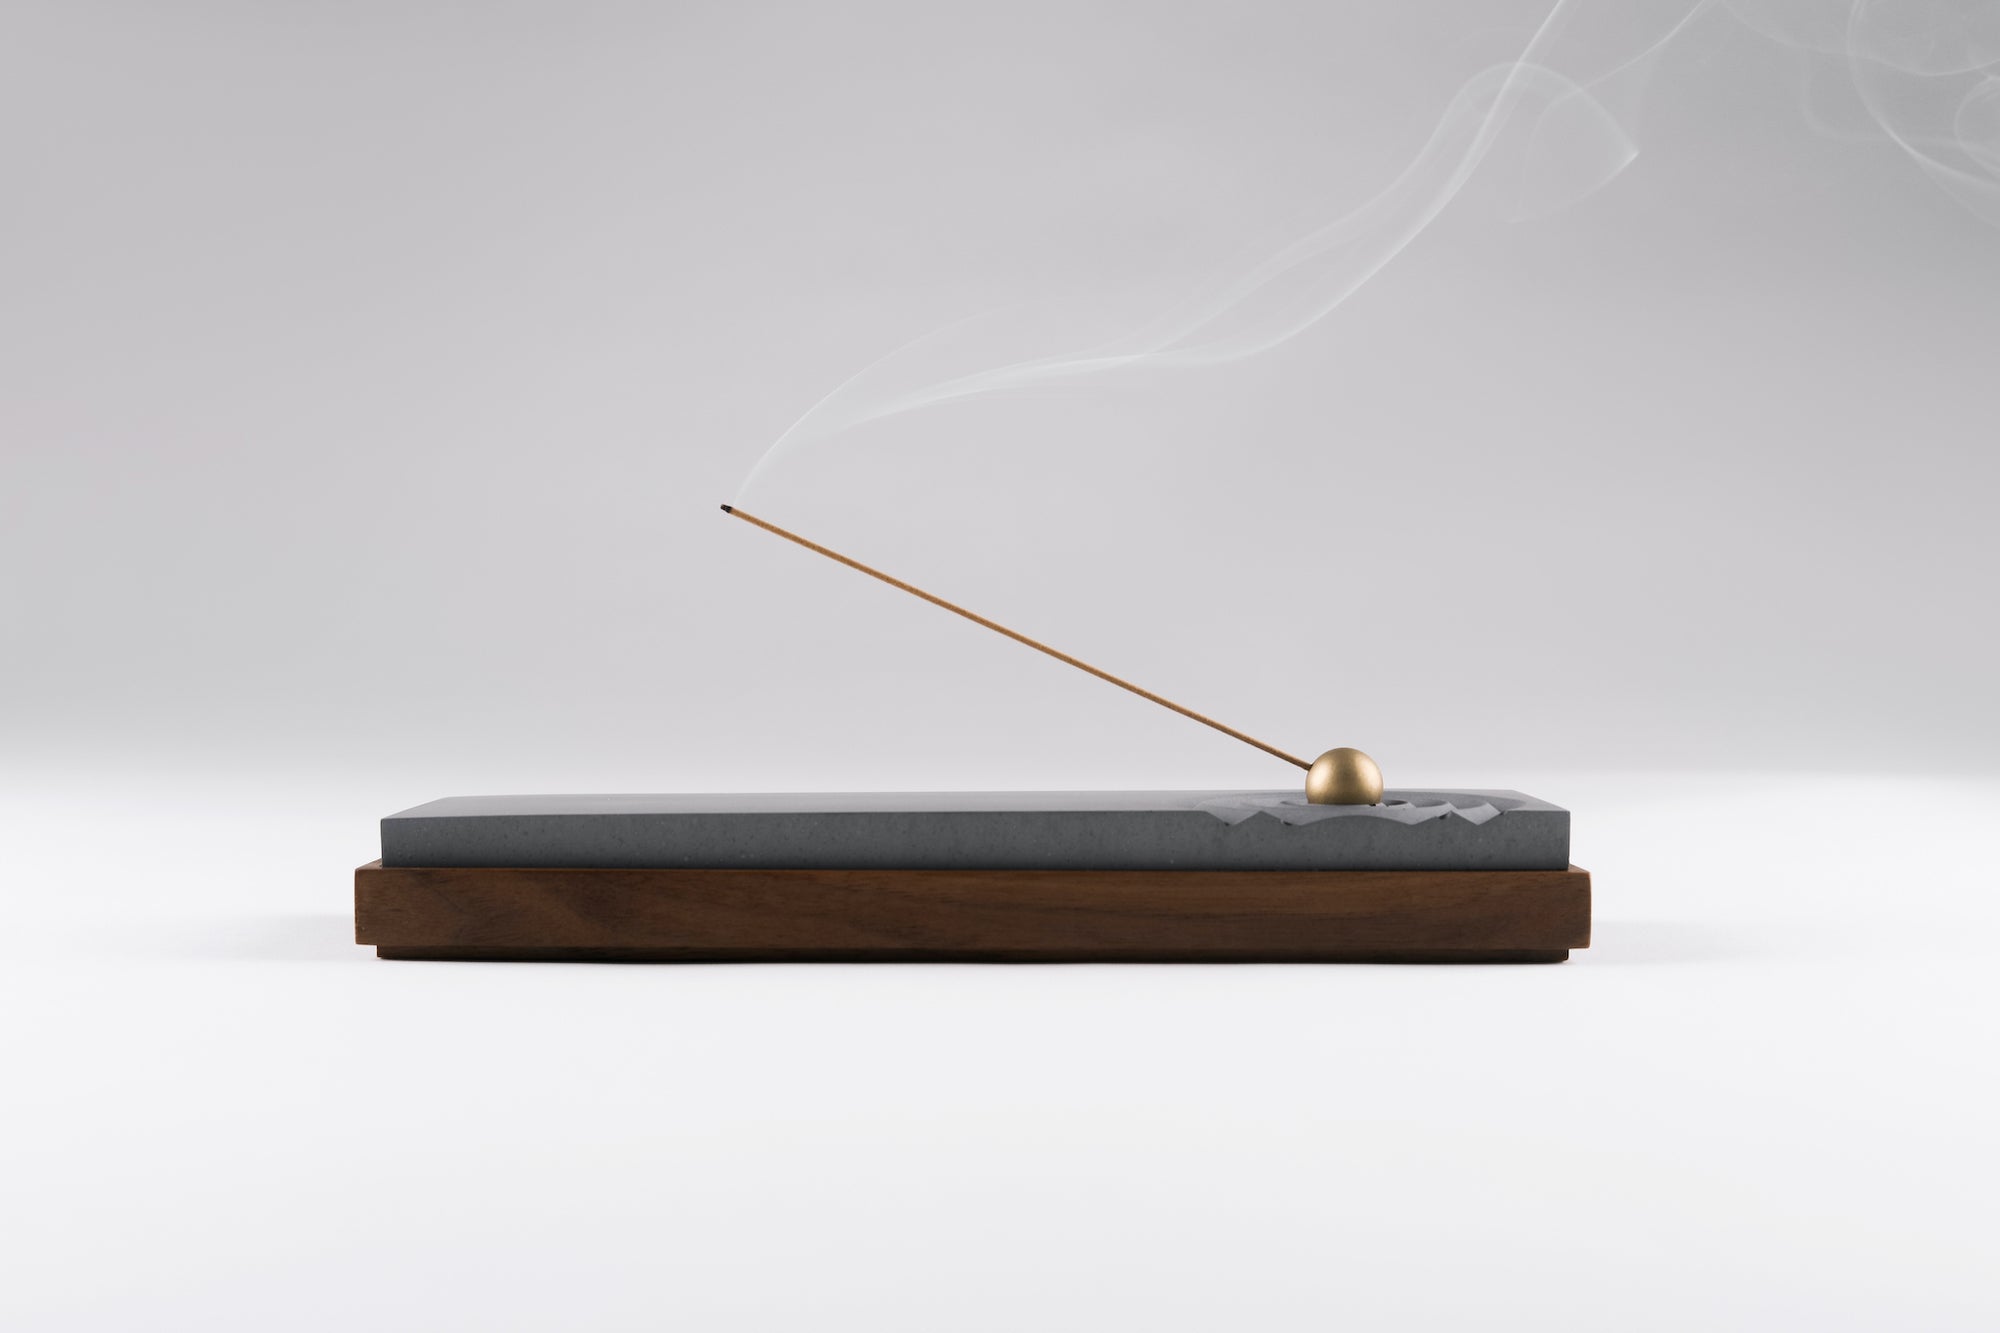 A Step-by-Step Guide to Light and Put out Incense Sticks